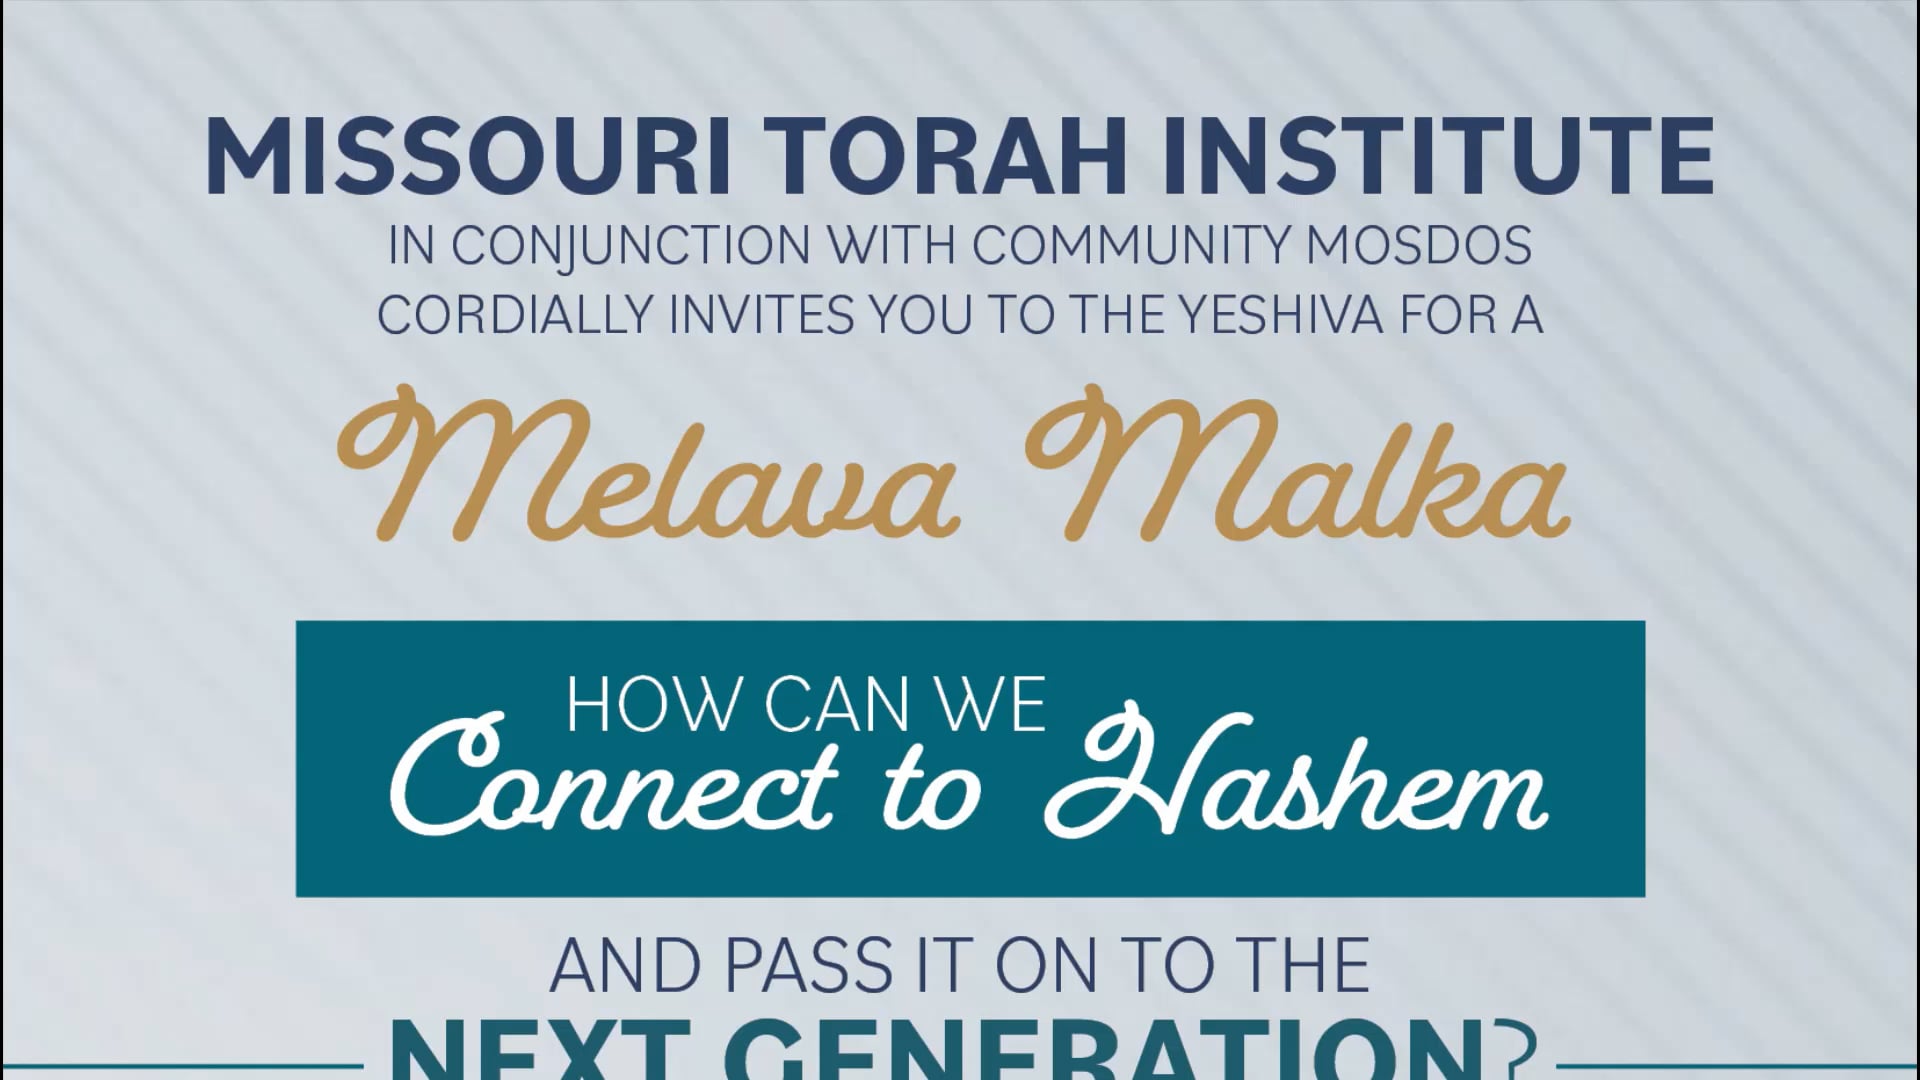 Rav Noach Orlowek and Rabbi Avrohom Stulberger- How can we connect to Hashem and pass it on to the next generation?